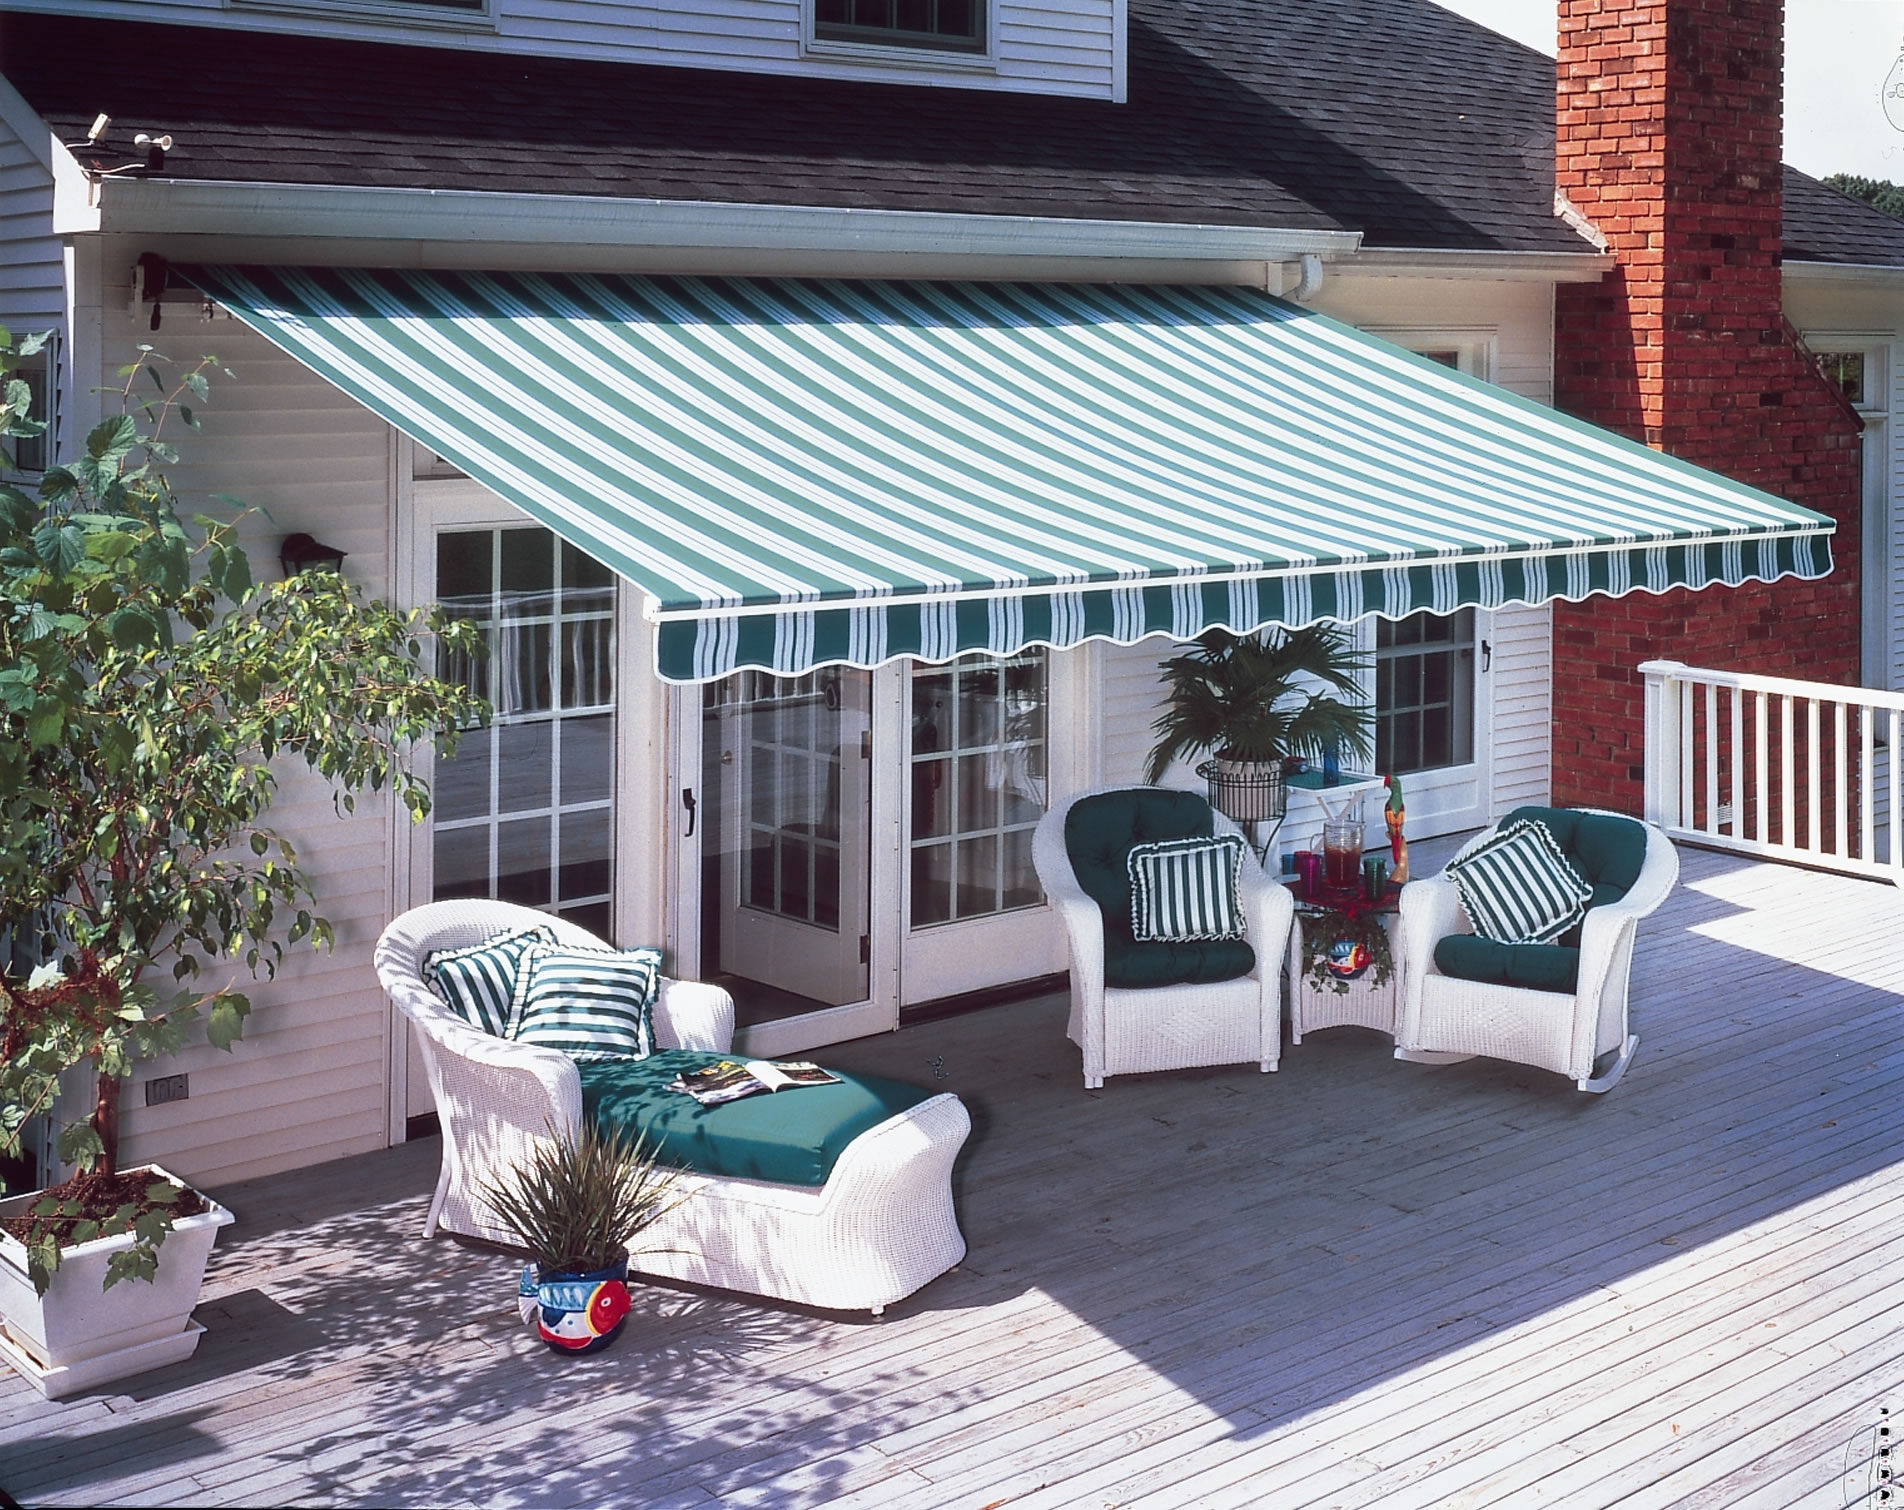 Retractable Awning Systems The Awning Warehouse NY Awnings NJ